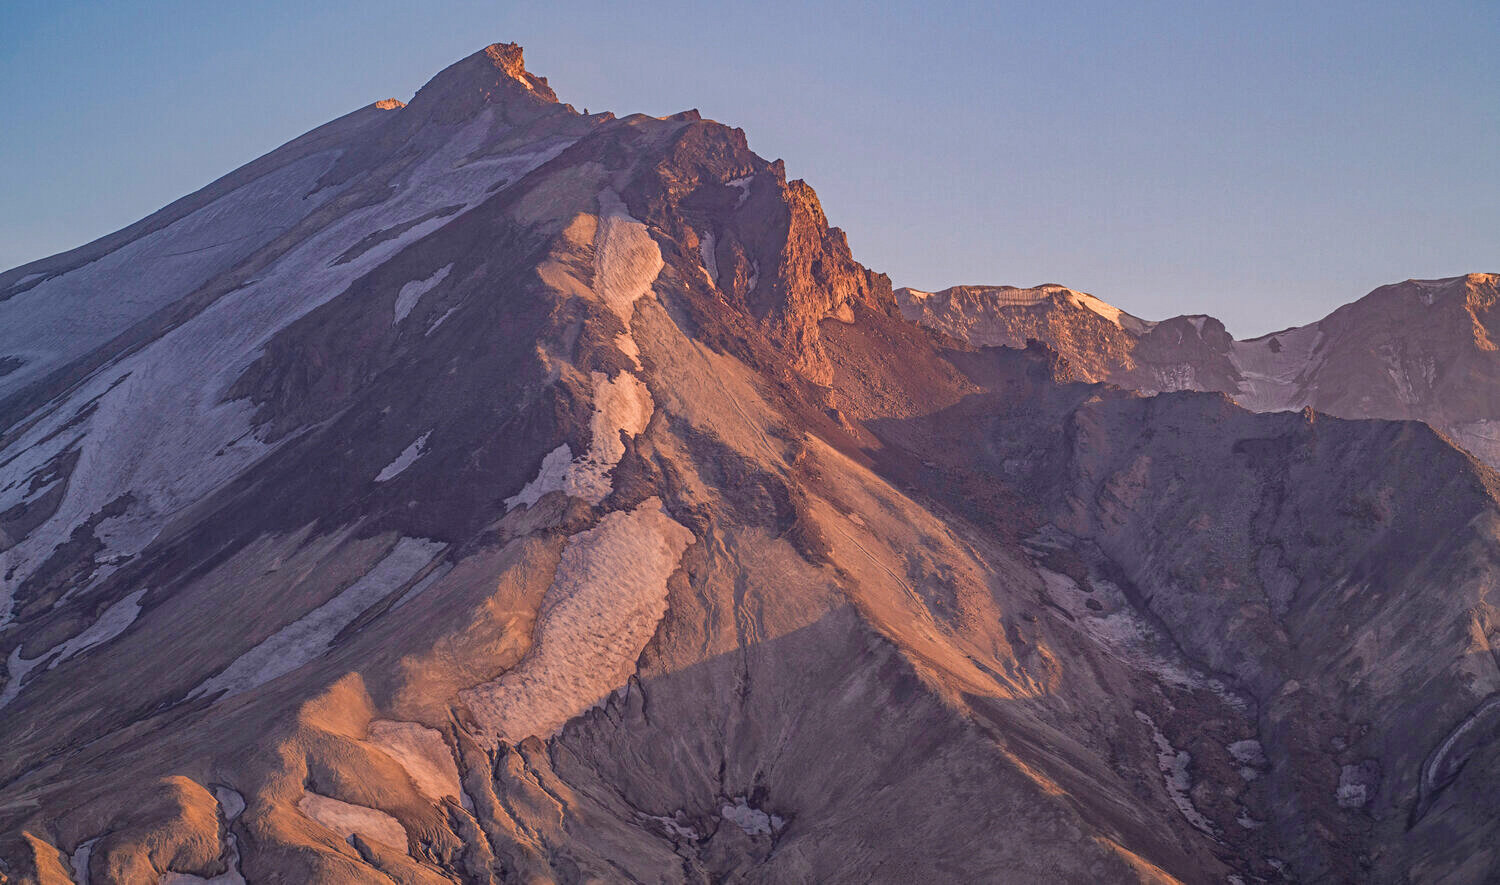 Light shines on the summit of Mount St. Helens as the sun sets on Thursday, July 6.